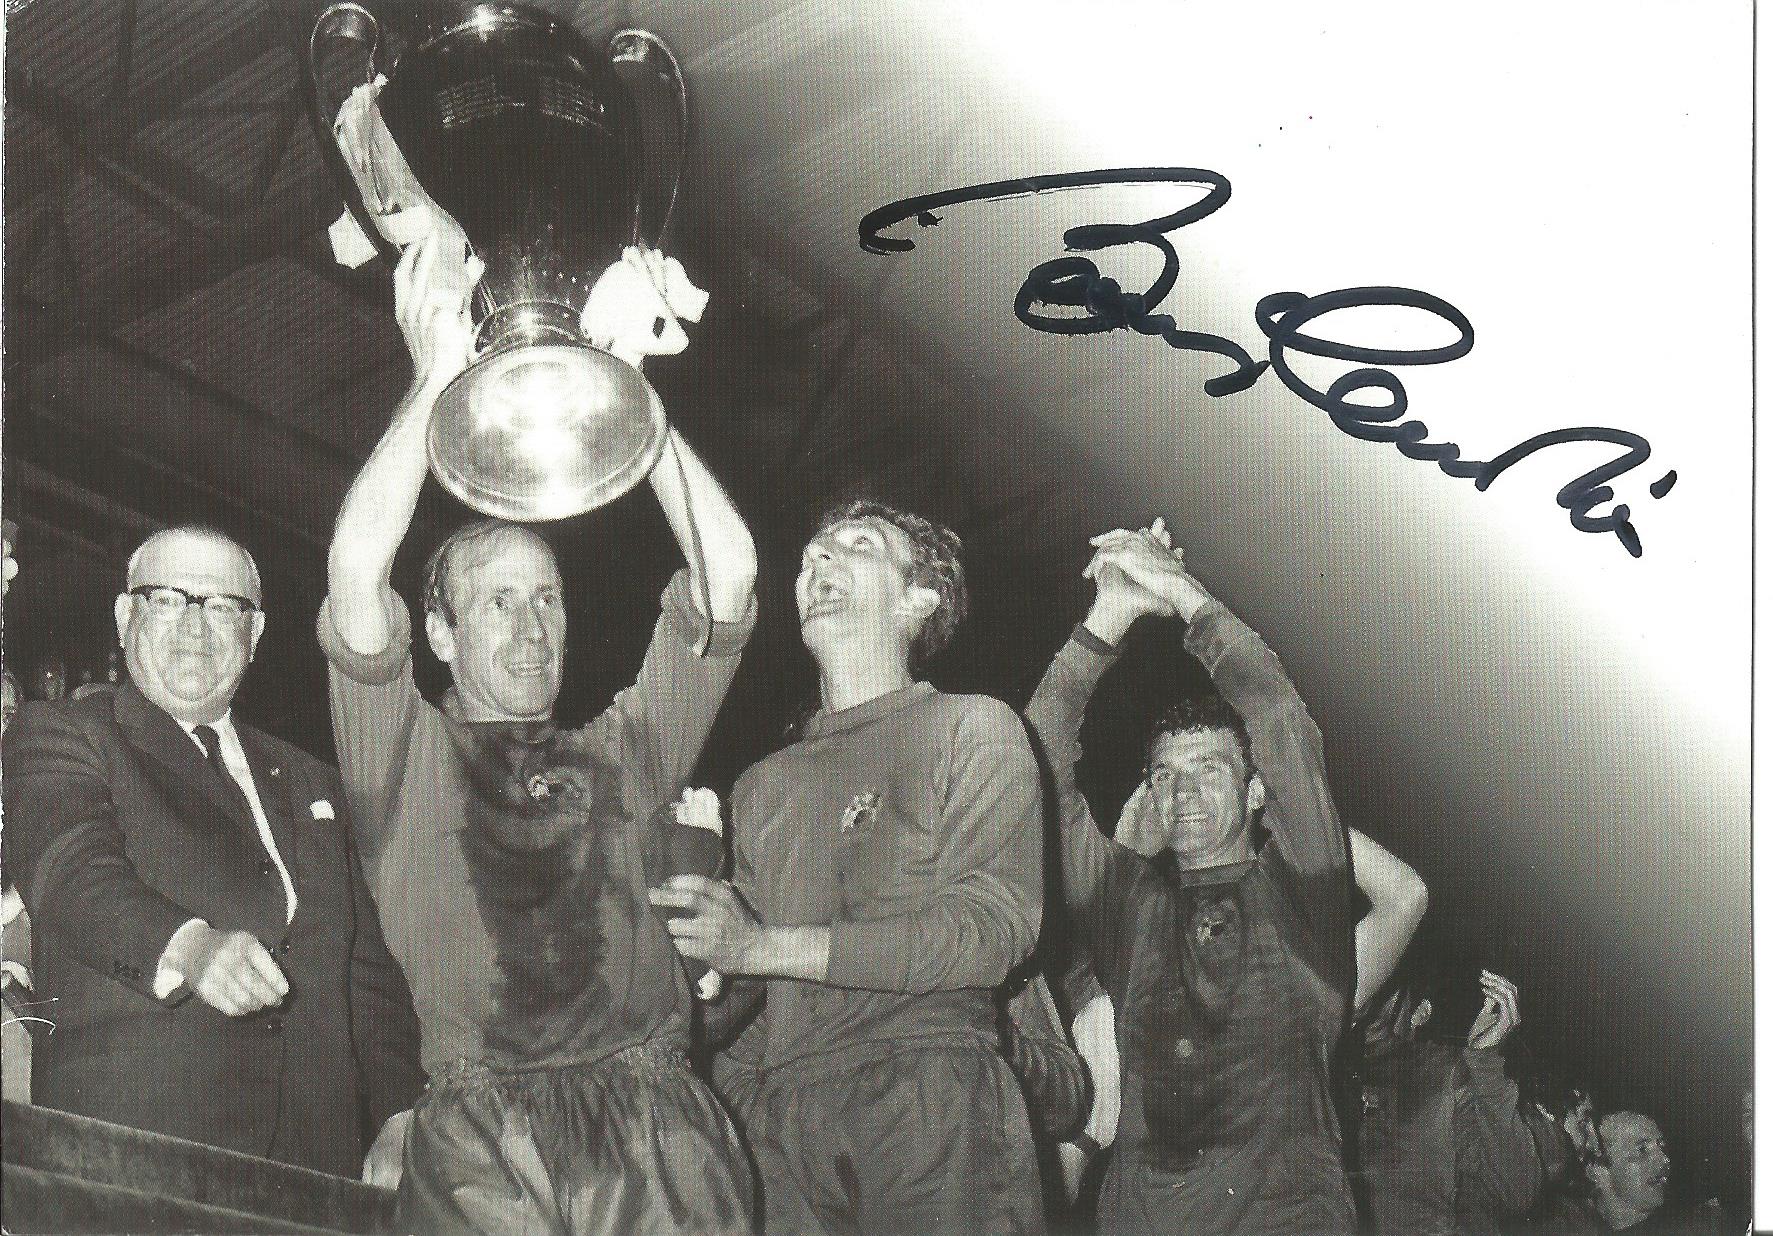 Football Bobby Charlton signed 6 x 4 inch b/w promo photo card holding up the European Cup.